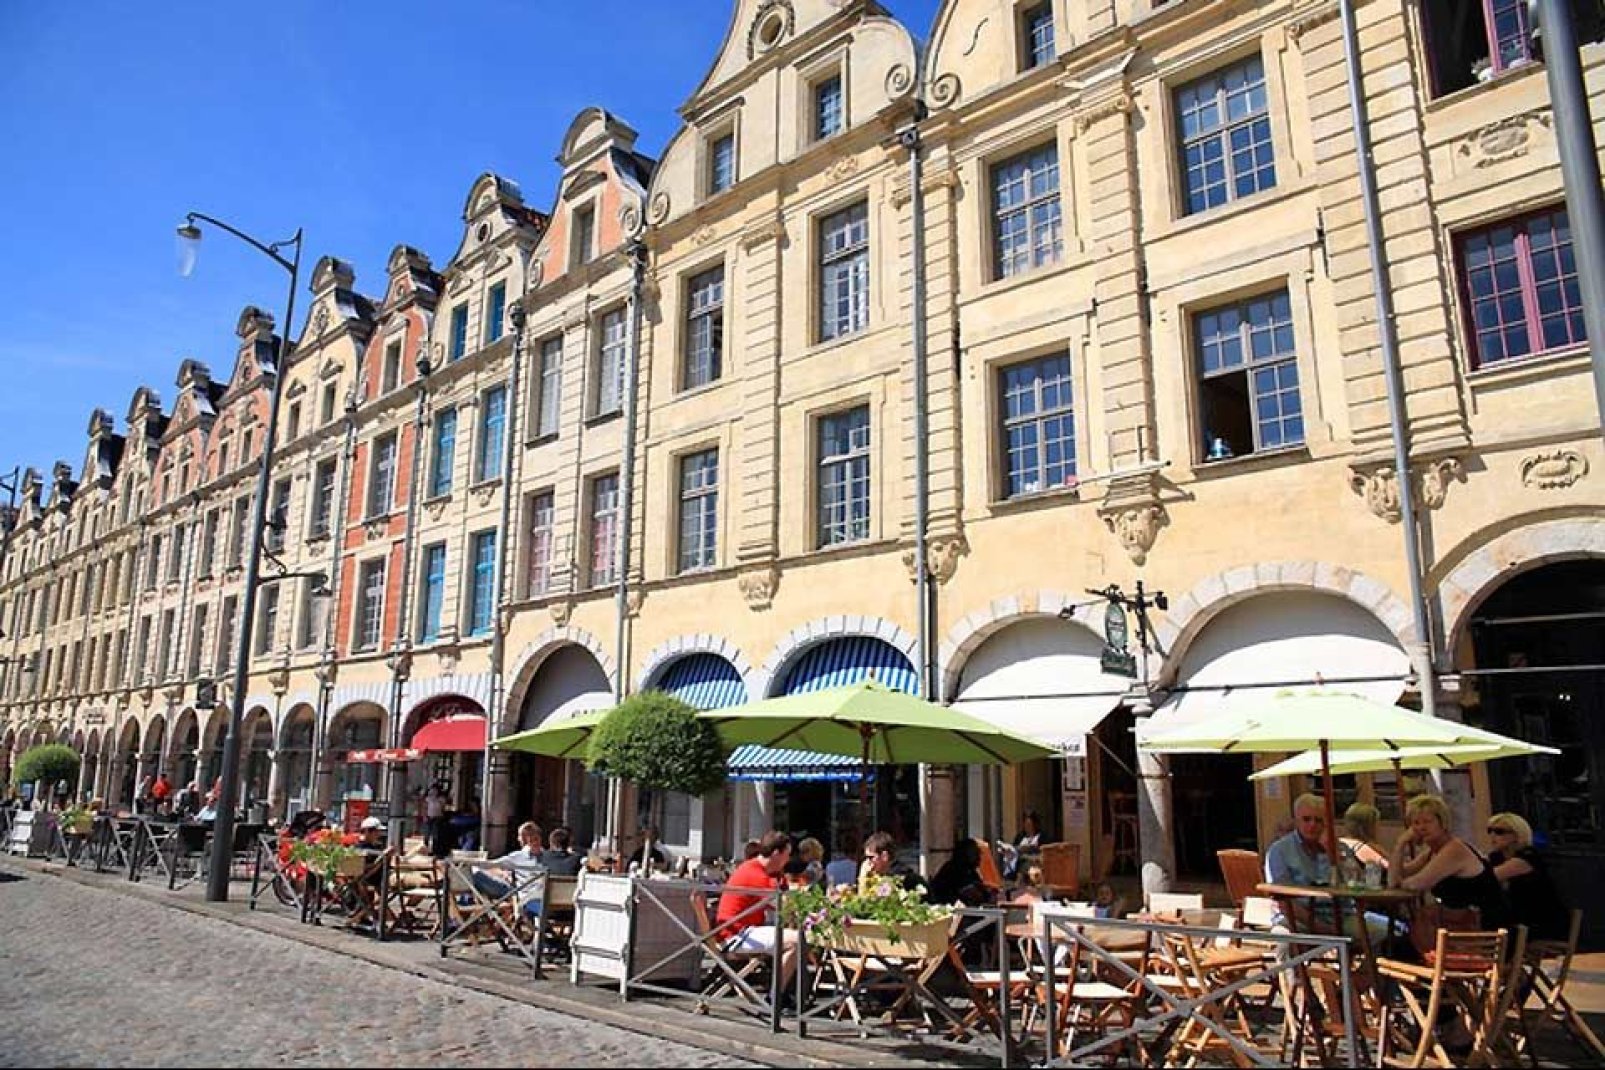 Arras is a town in the French department of Nord-Pas-de-Calais with 45,000 inhabitants.